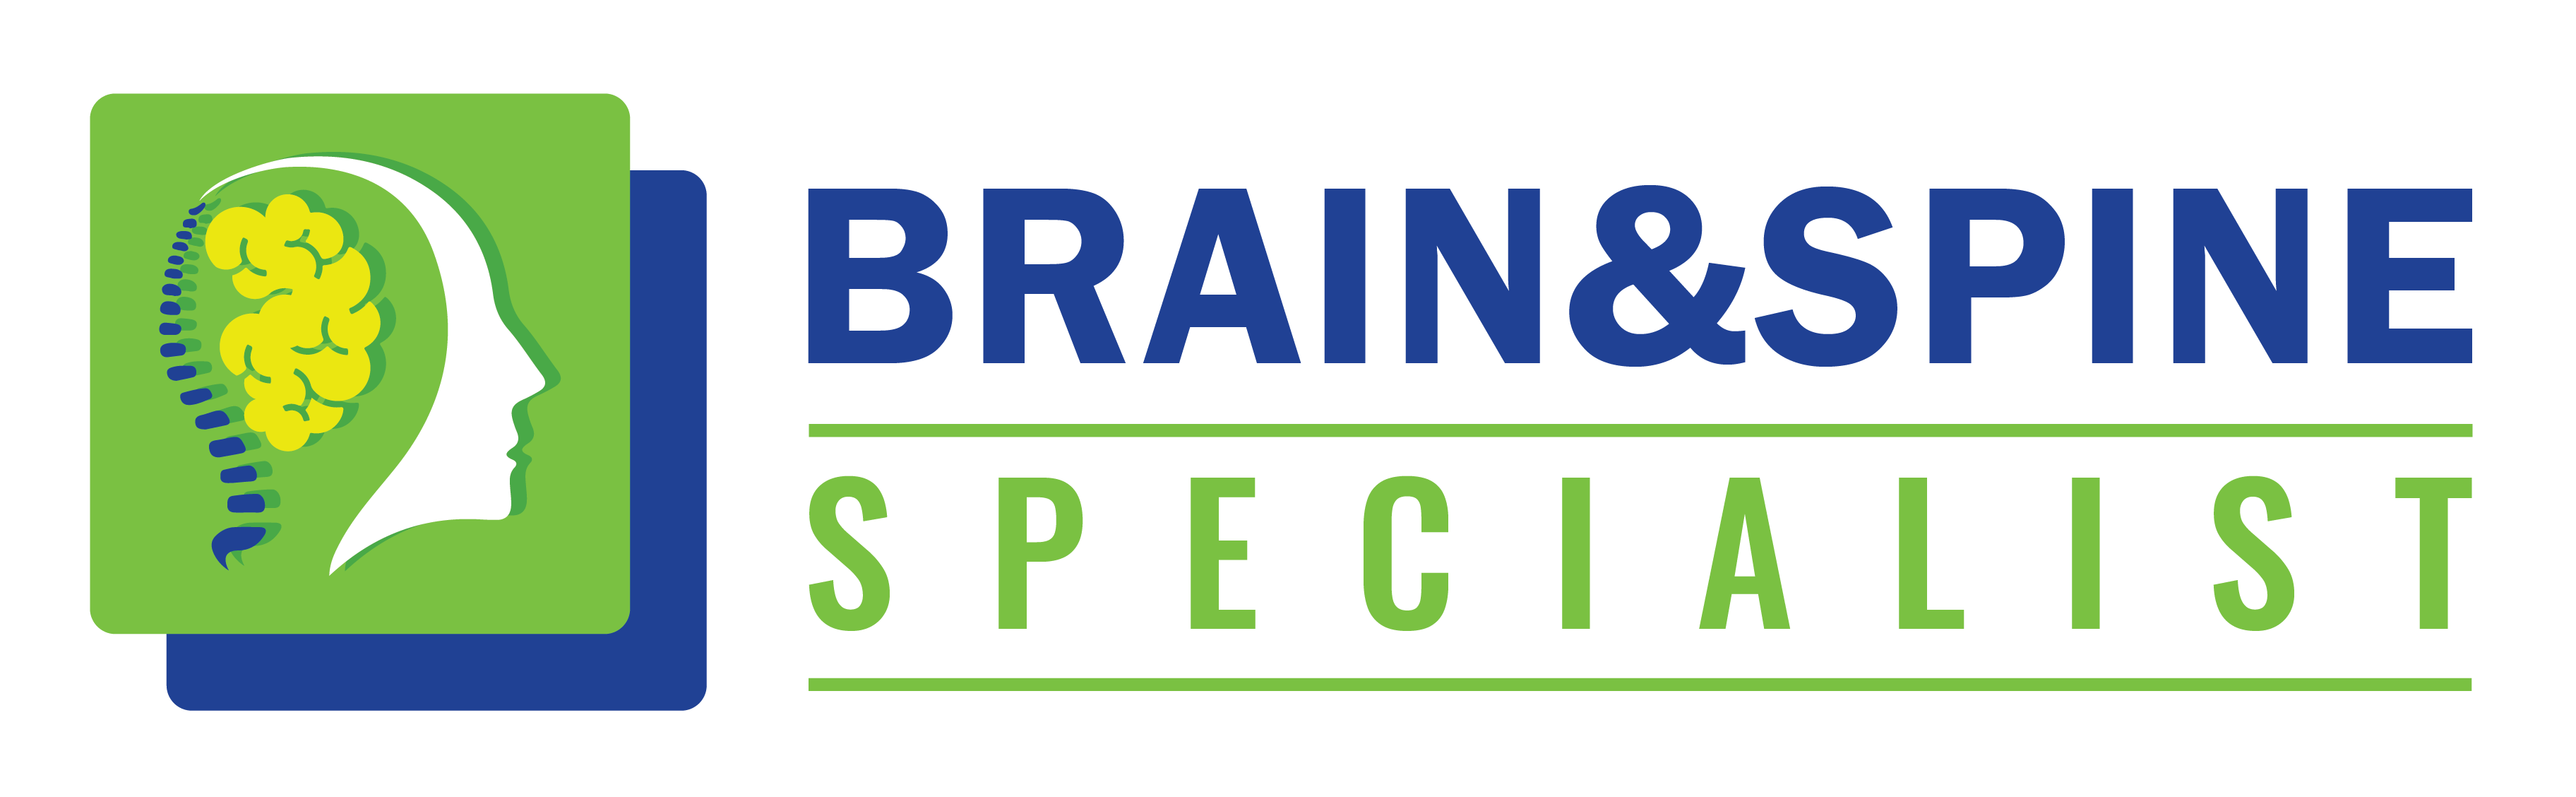 brain and spine specialist